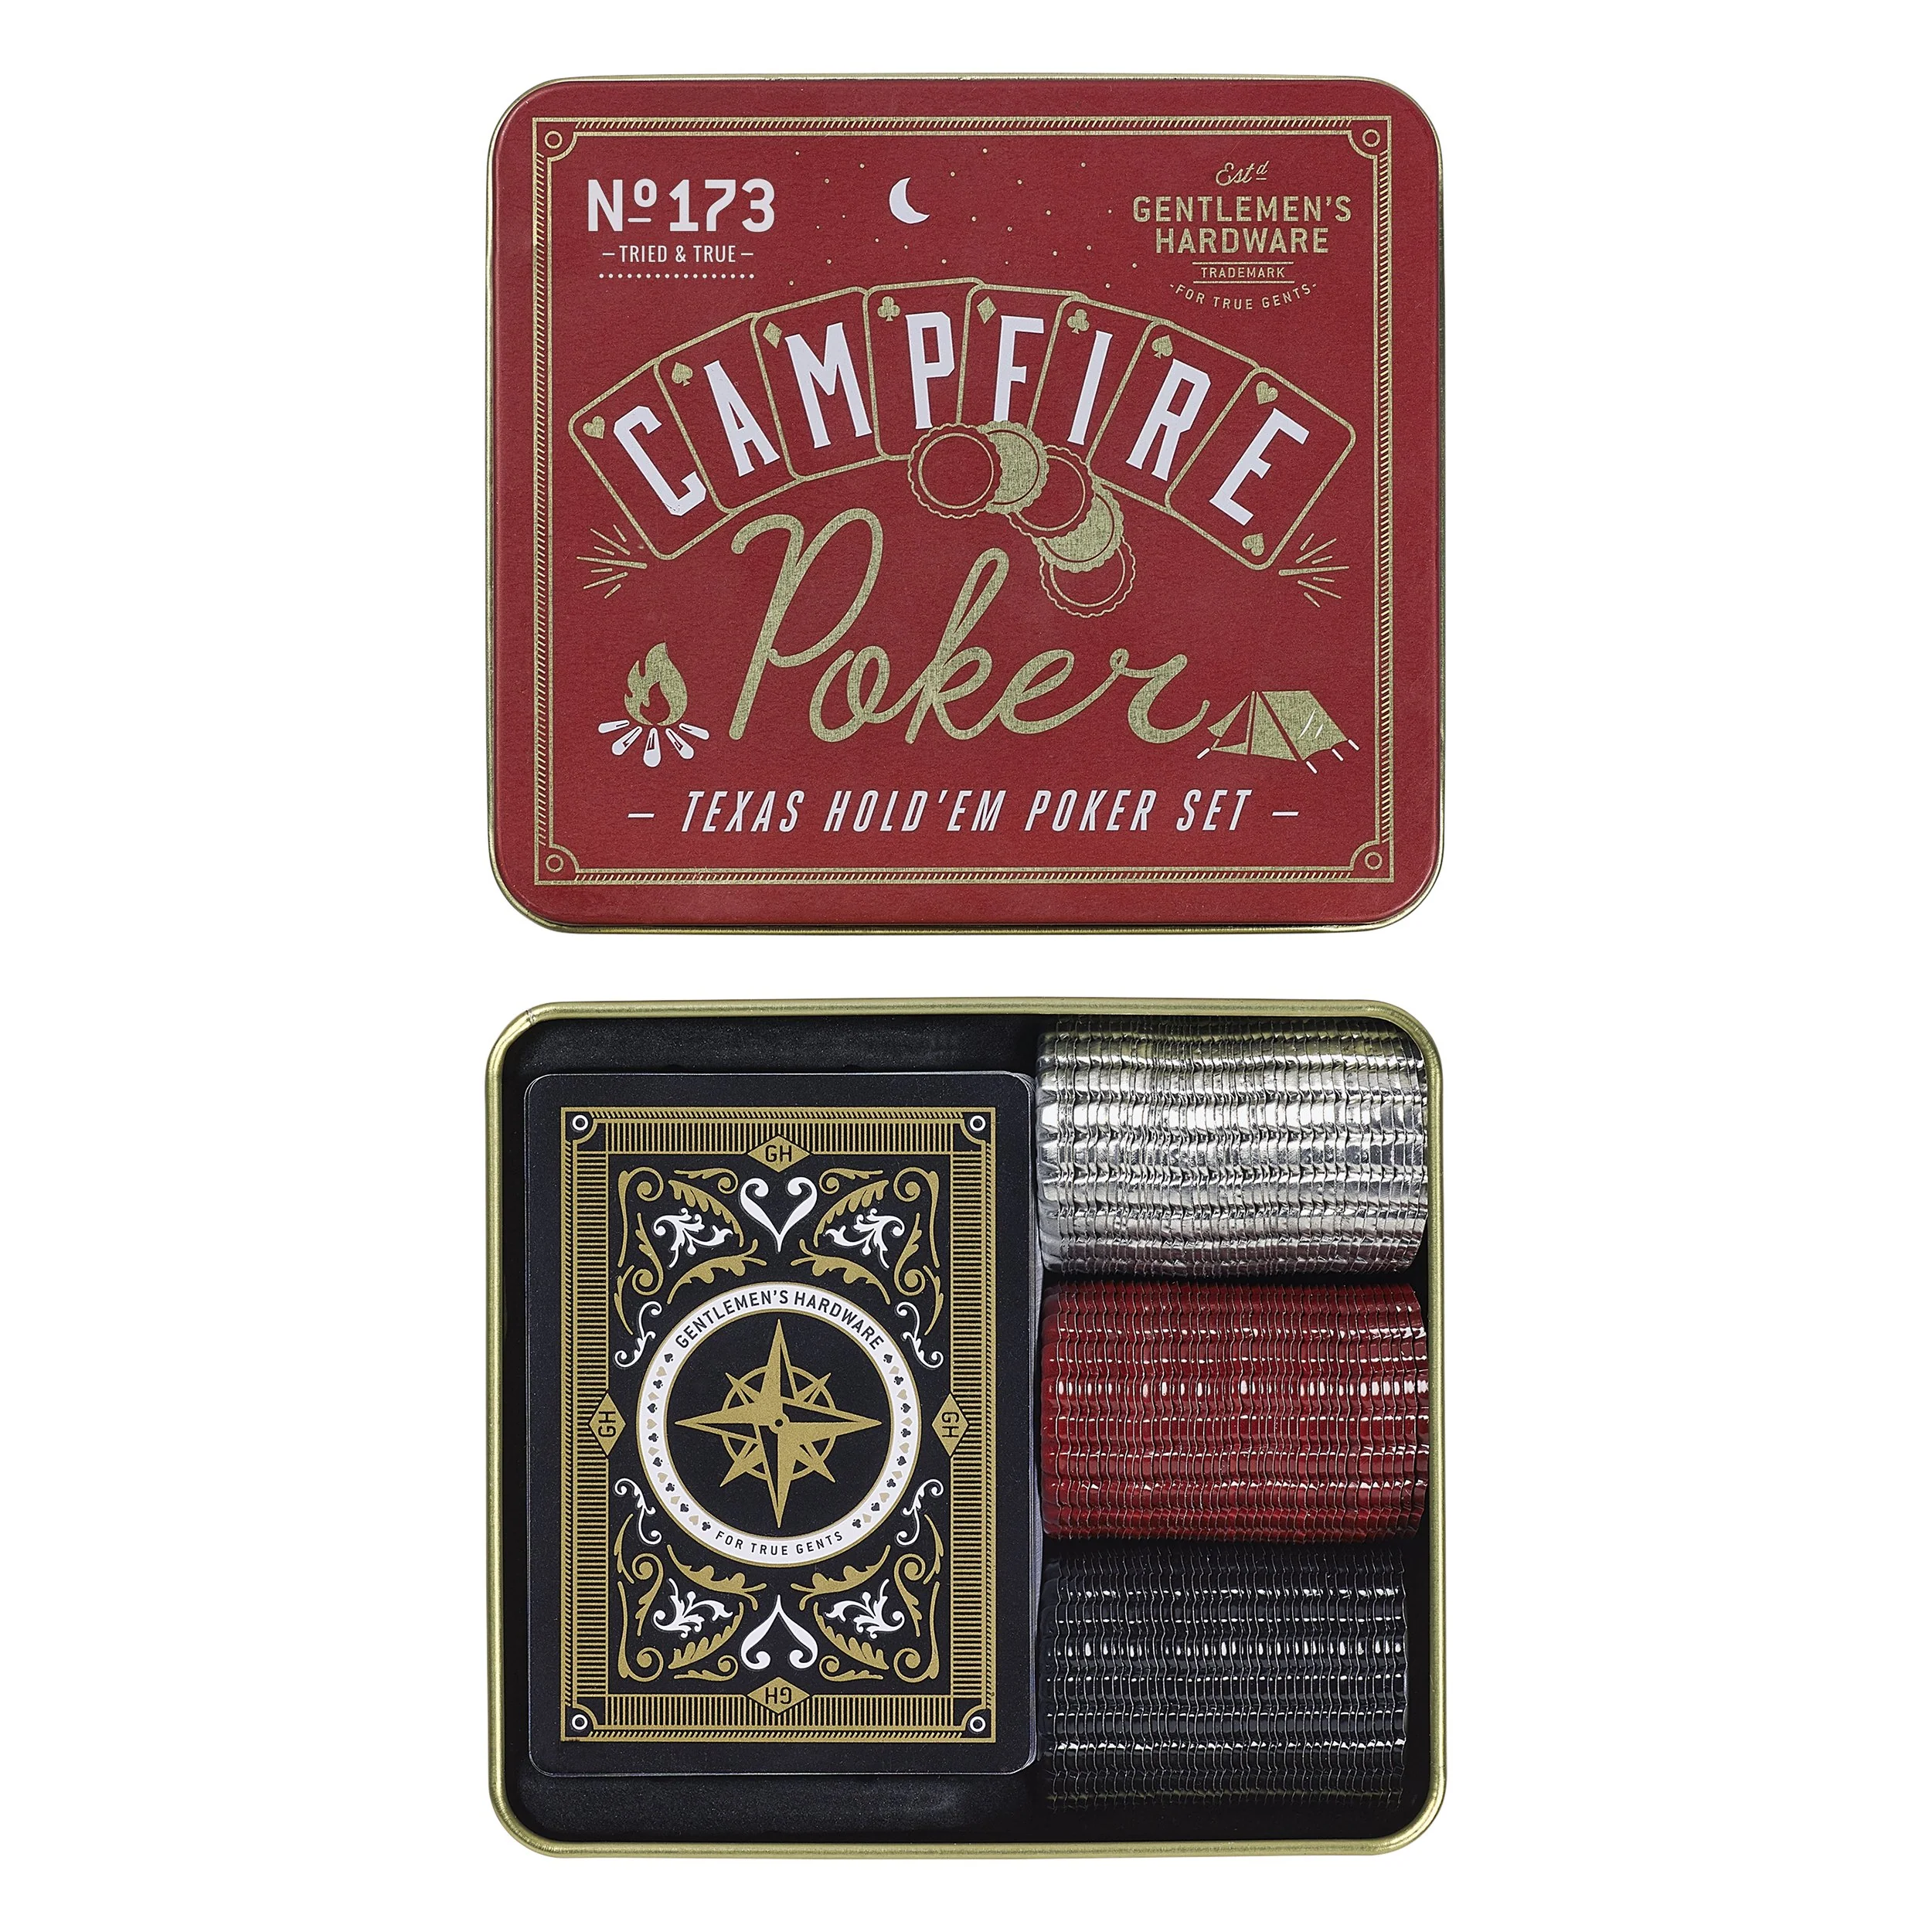 Campfire game  pack with lid removed to show inside contents. 